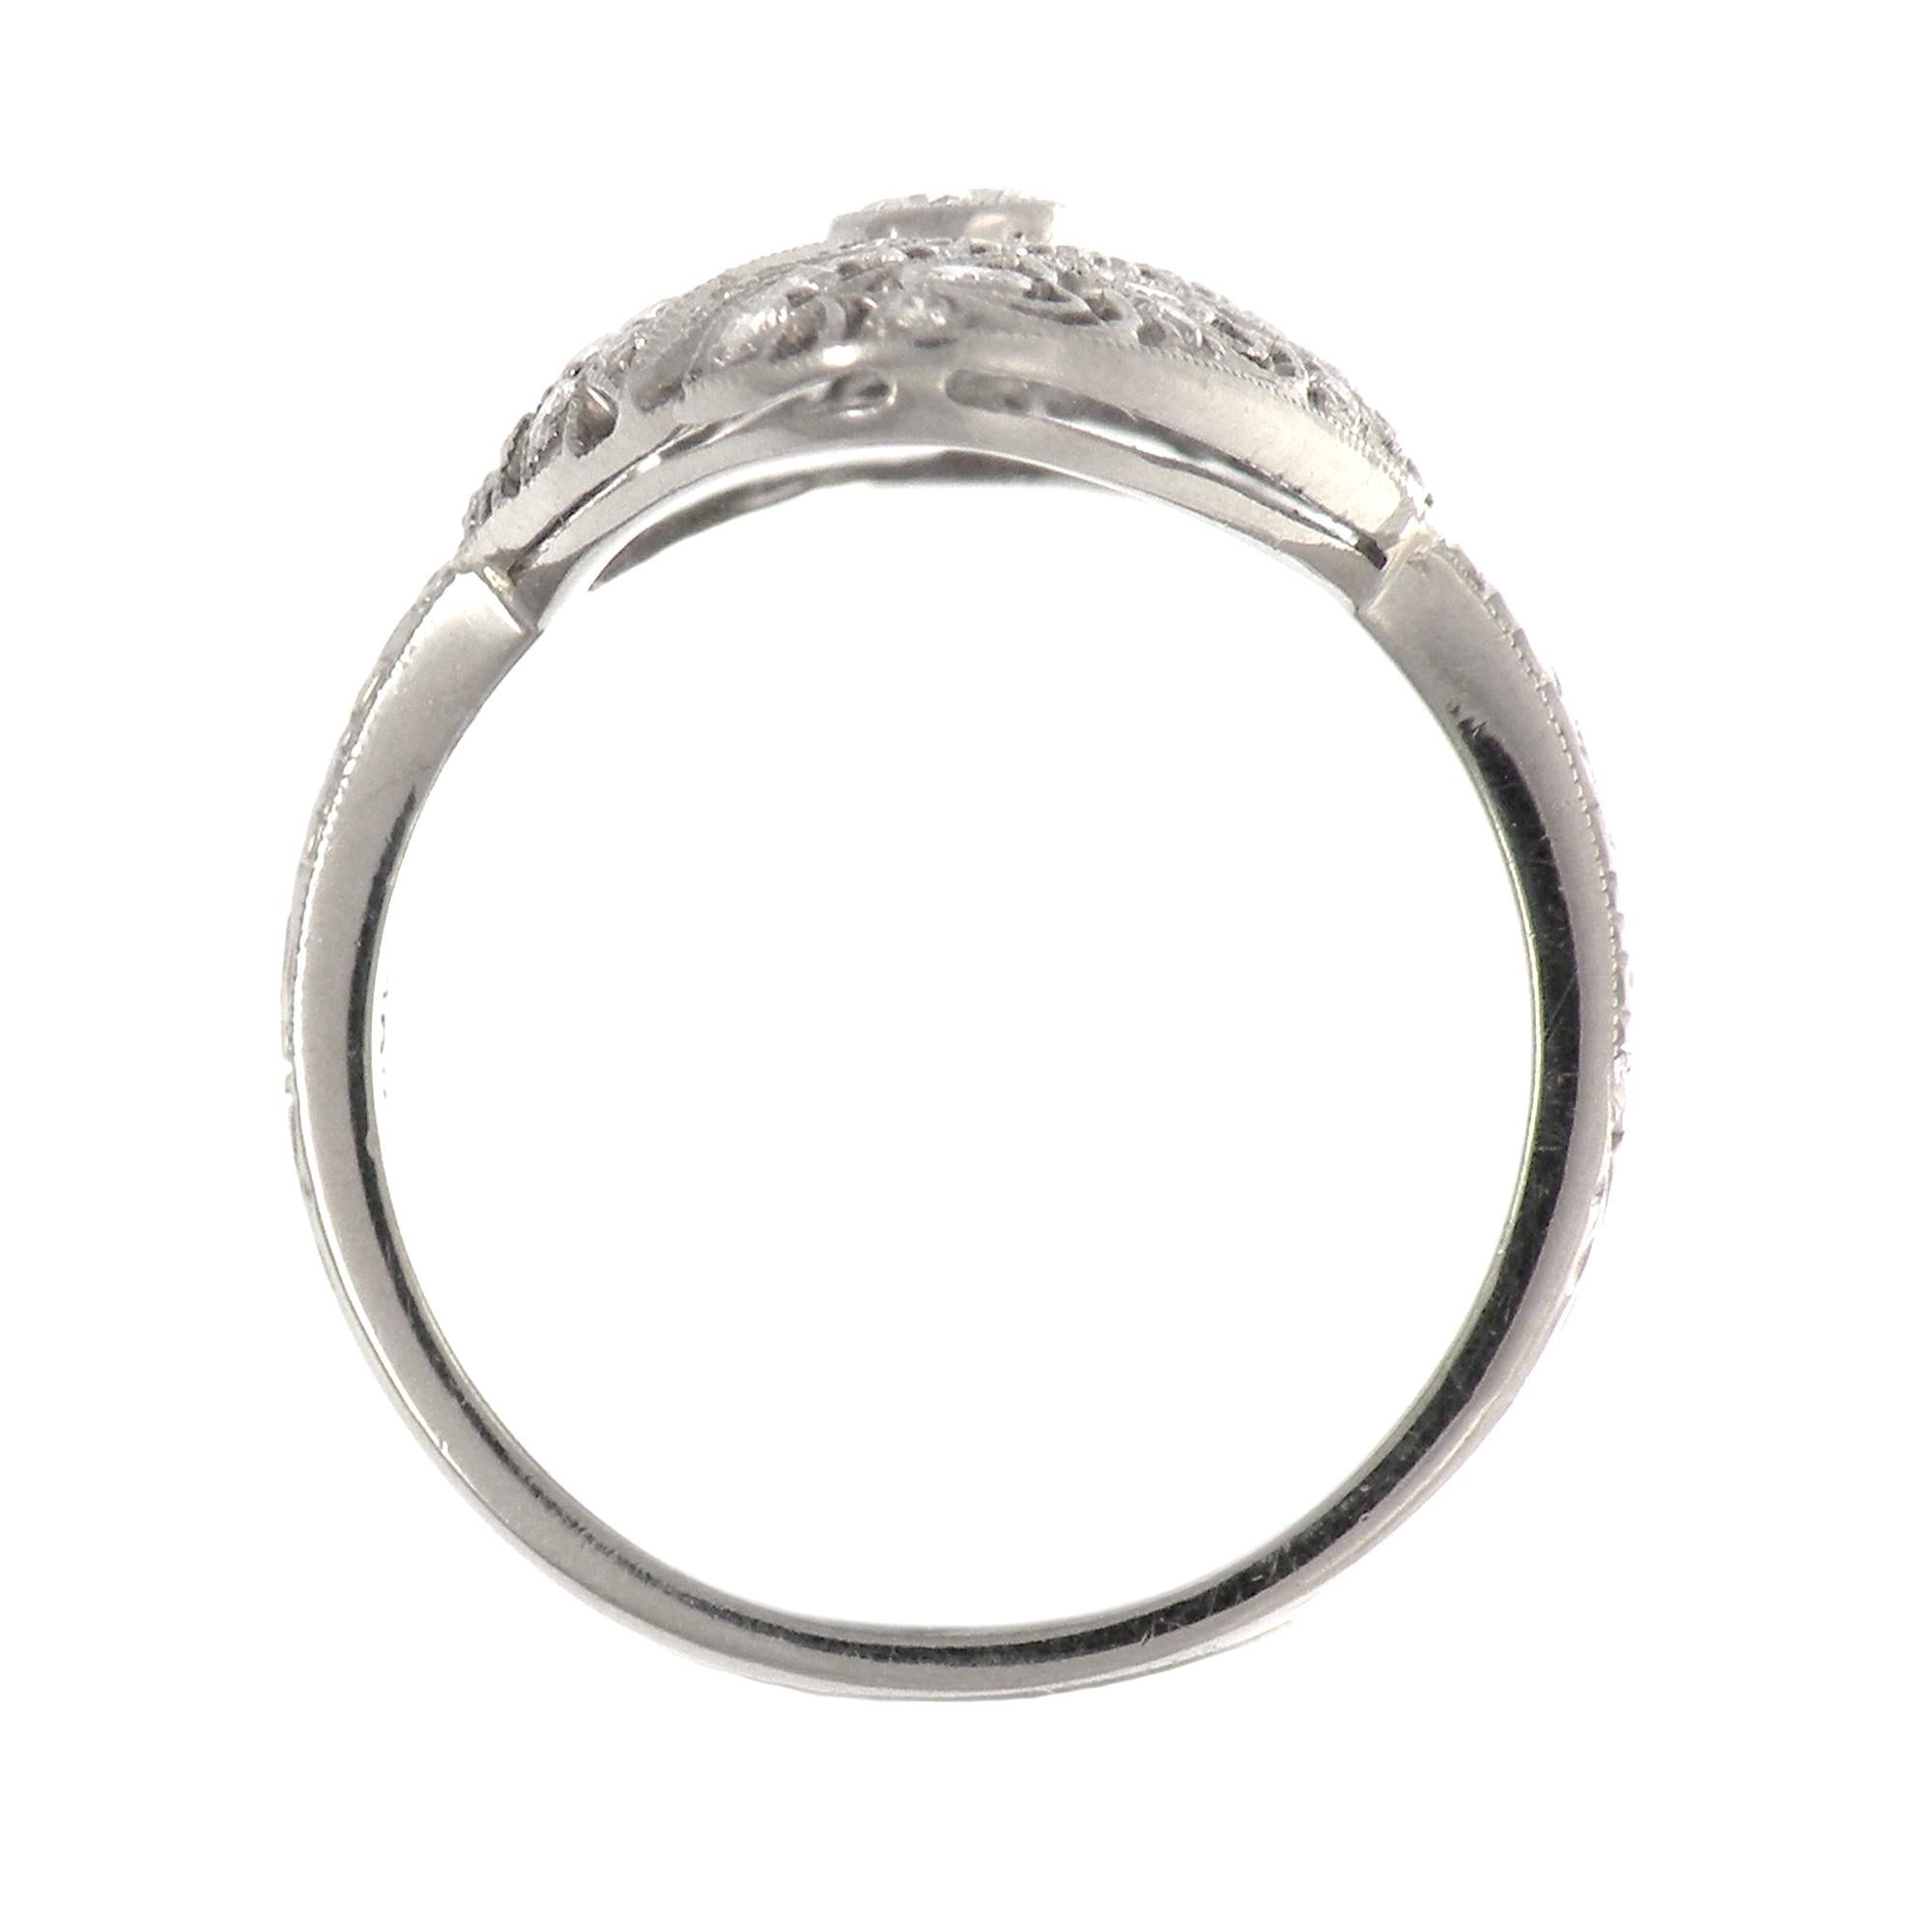 This delicate, hand crafted 18 carat white gold ring has pierced open work and is diamond encrusted which perfectly compliments the central 0.08 ct diamond plus 0.34 ct of smaller stones. The filigree work on this piece is absolutely magnificent.